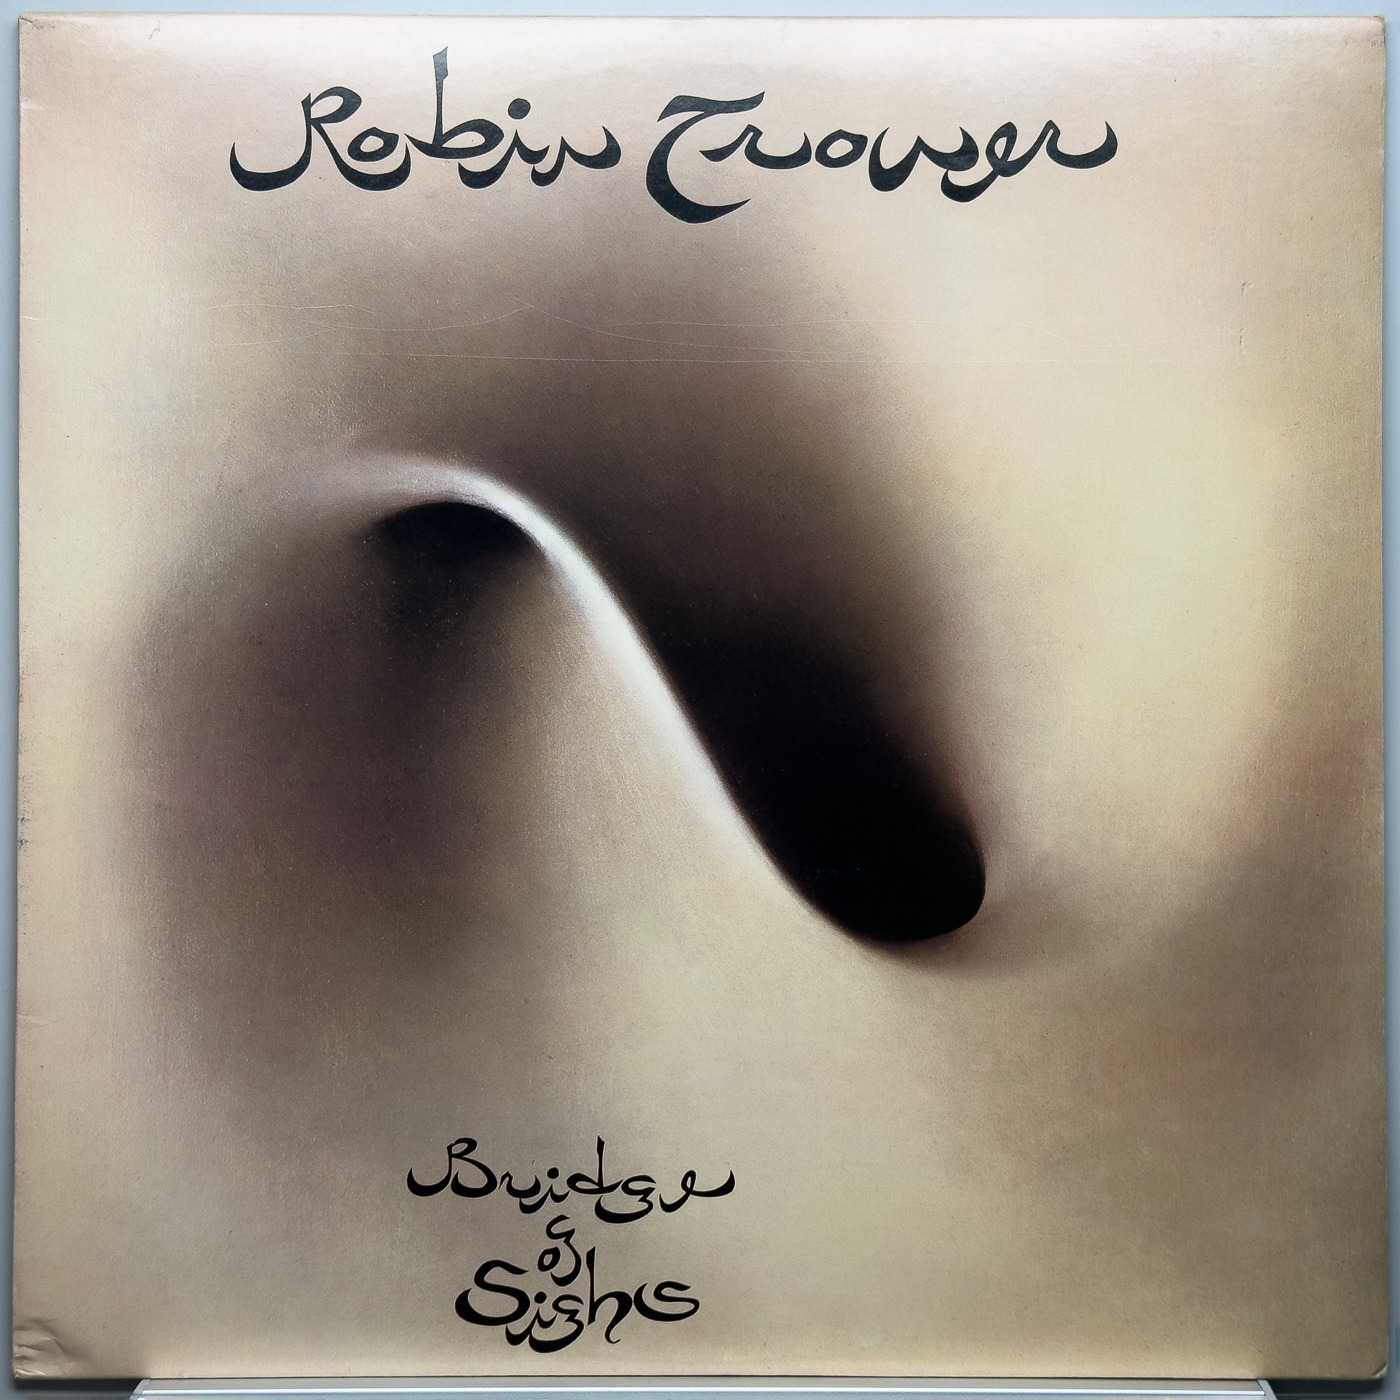 Robin Trower 33 RPM LPs from 1970s - Select individual LPs by Title